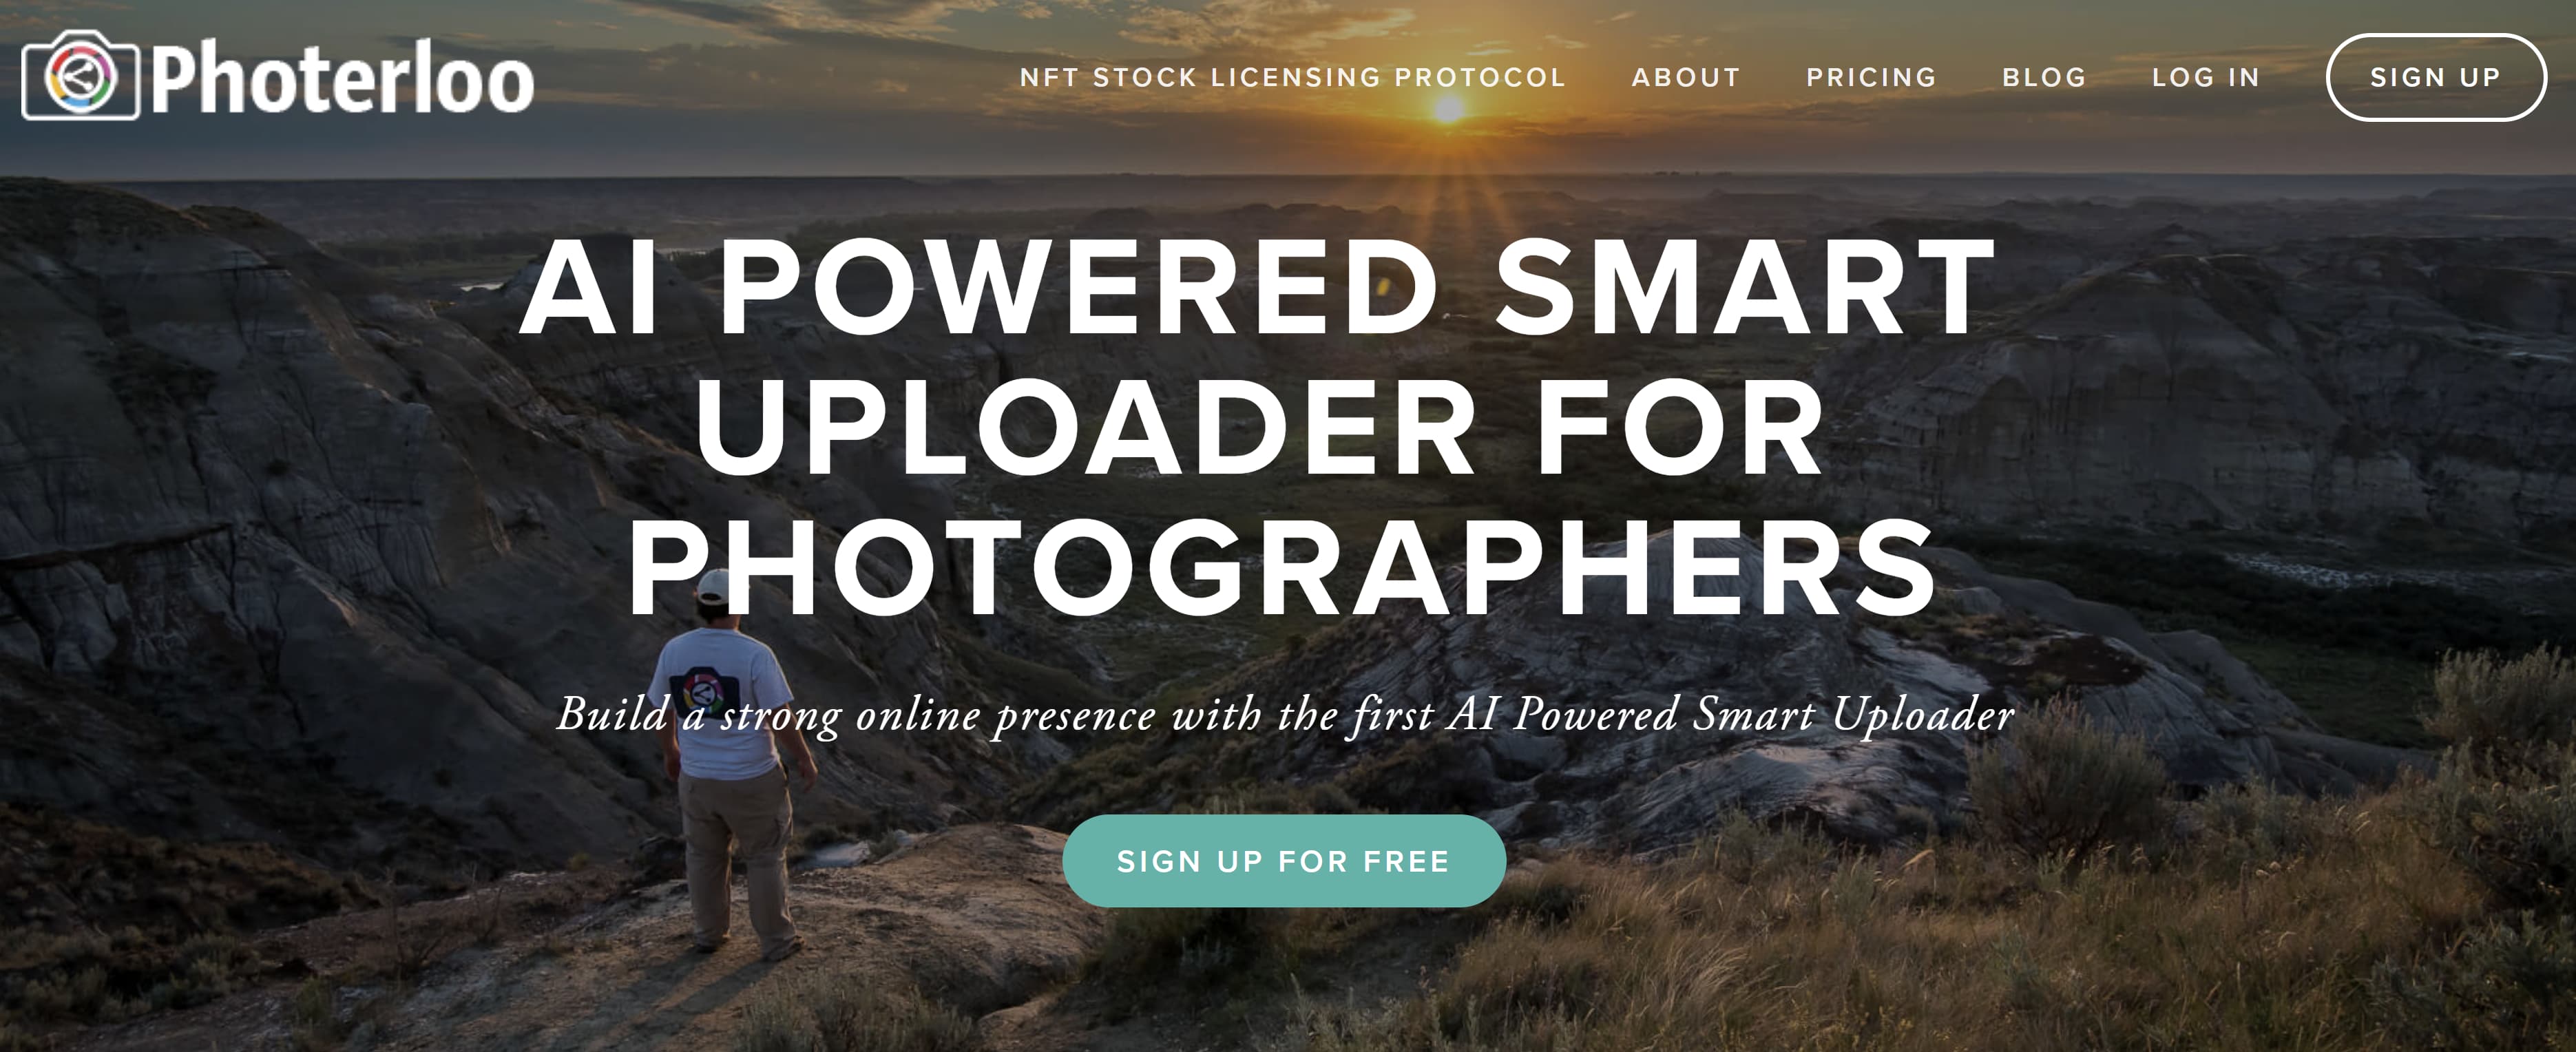 photerloo.jpg?width=3741&height=1528&name=photerloo - 15 Apps for Instagram Posts to Make Your Content Stand Out